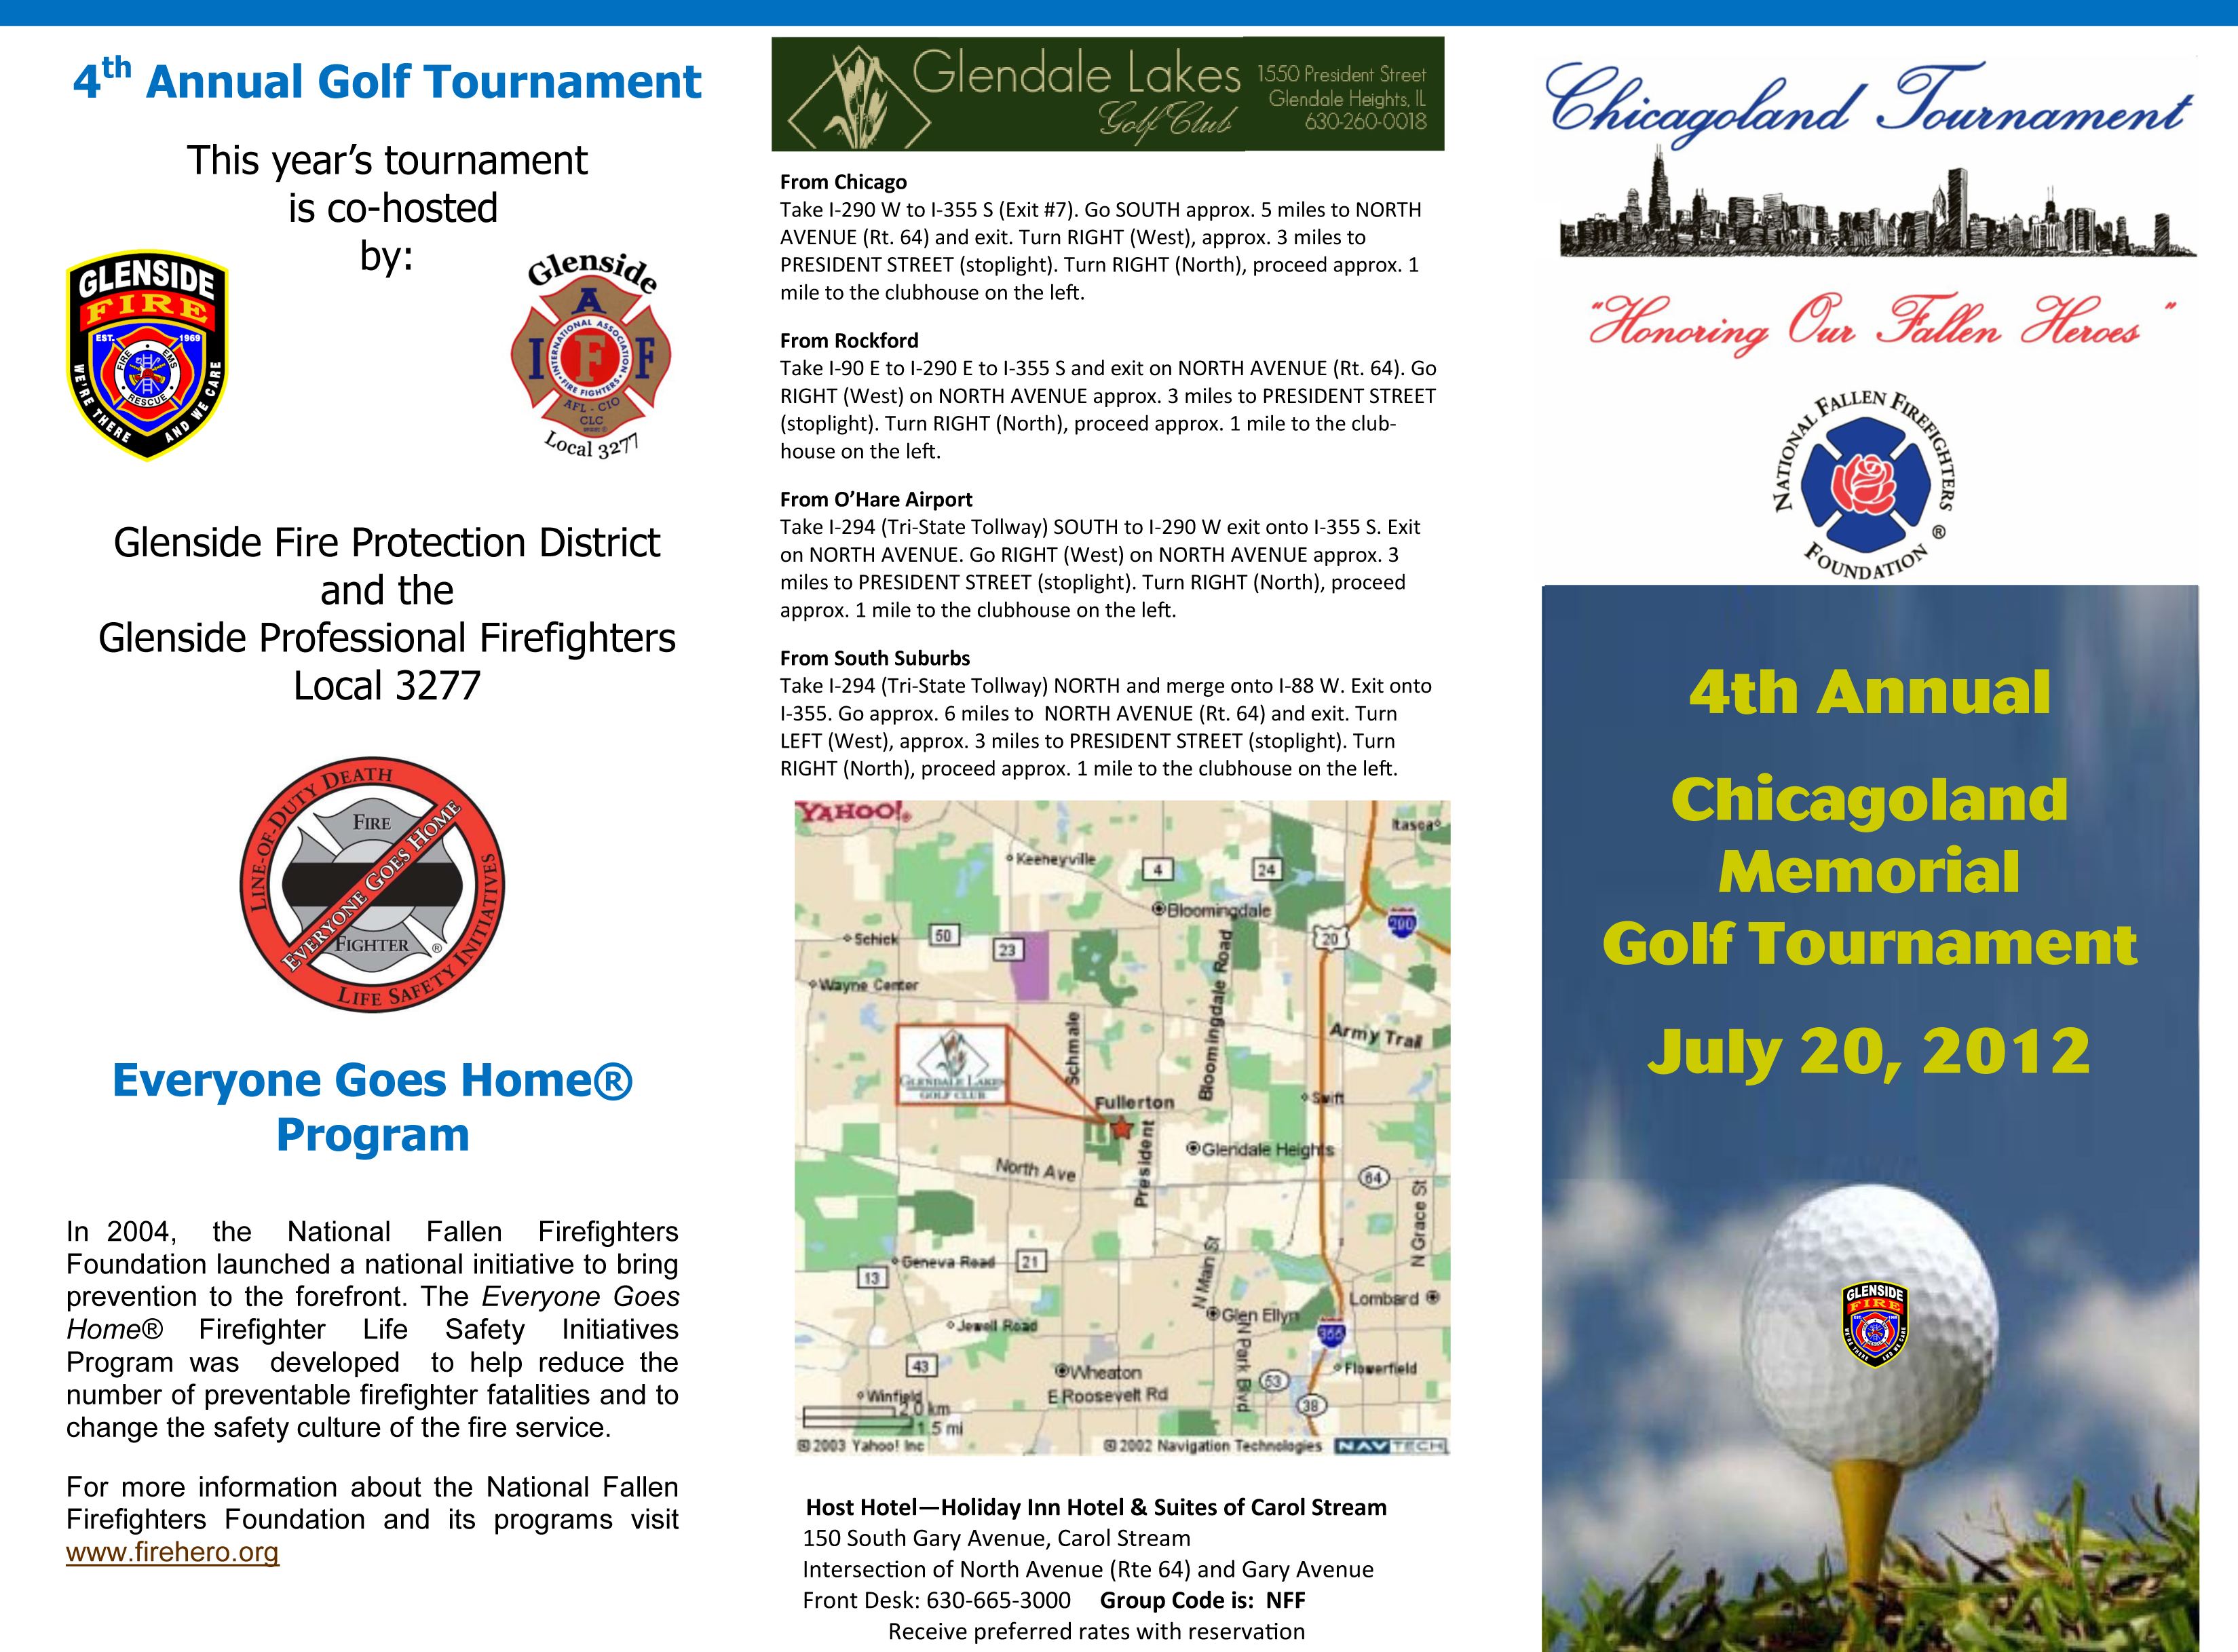 Glenside FPD Charity Golf Outing for the National Fallen Firefighters Foundation